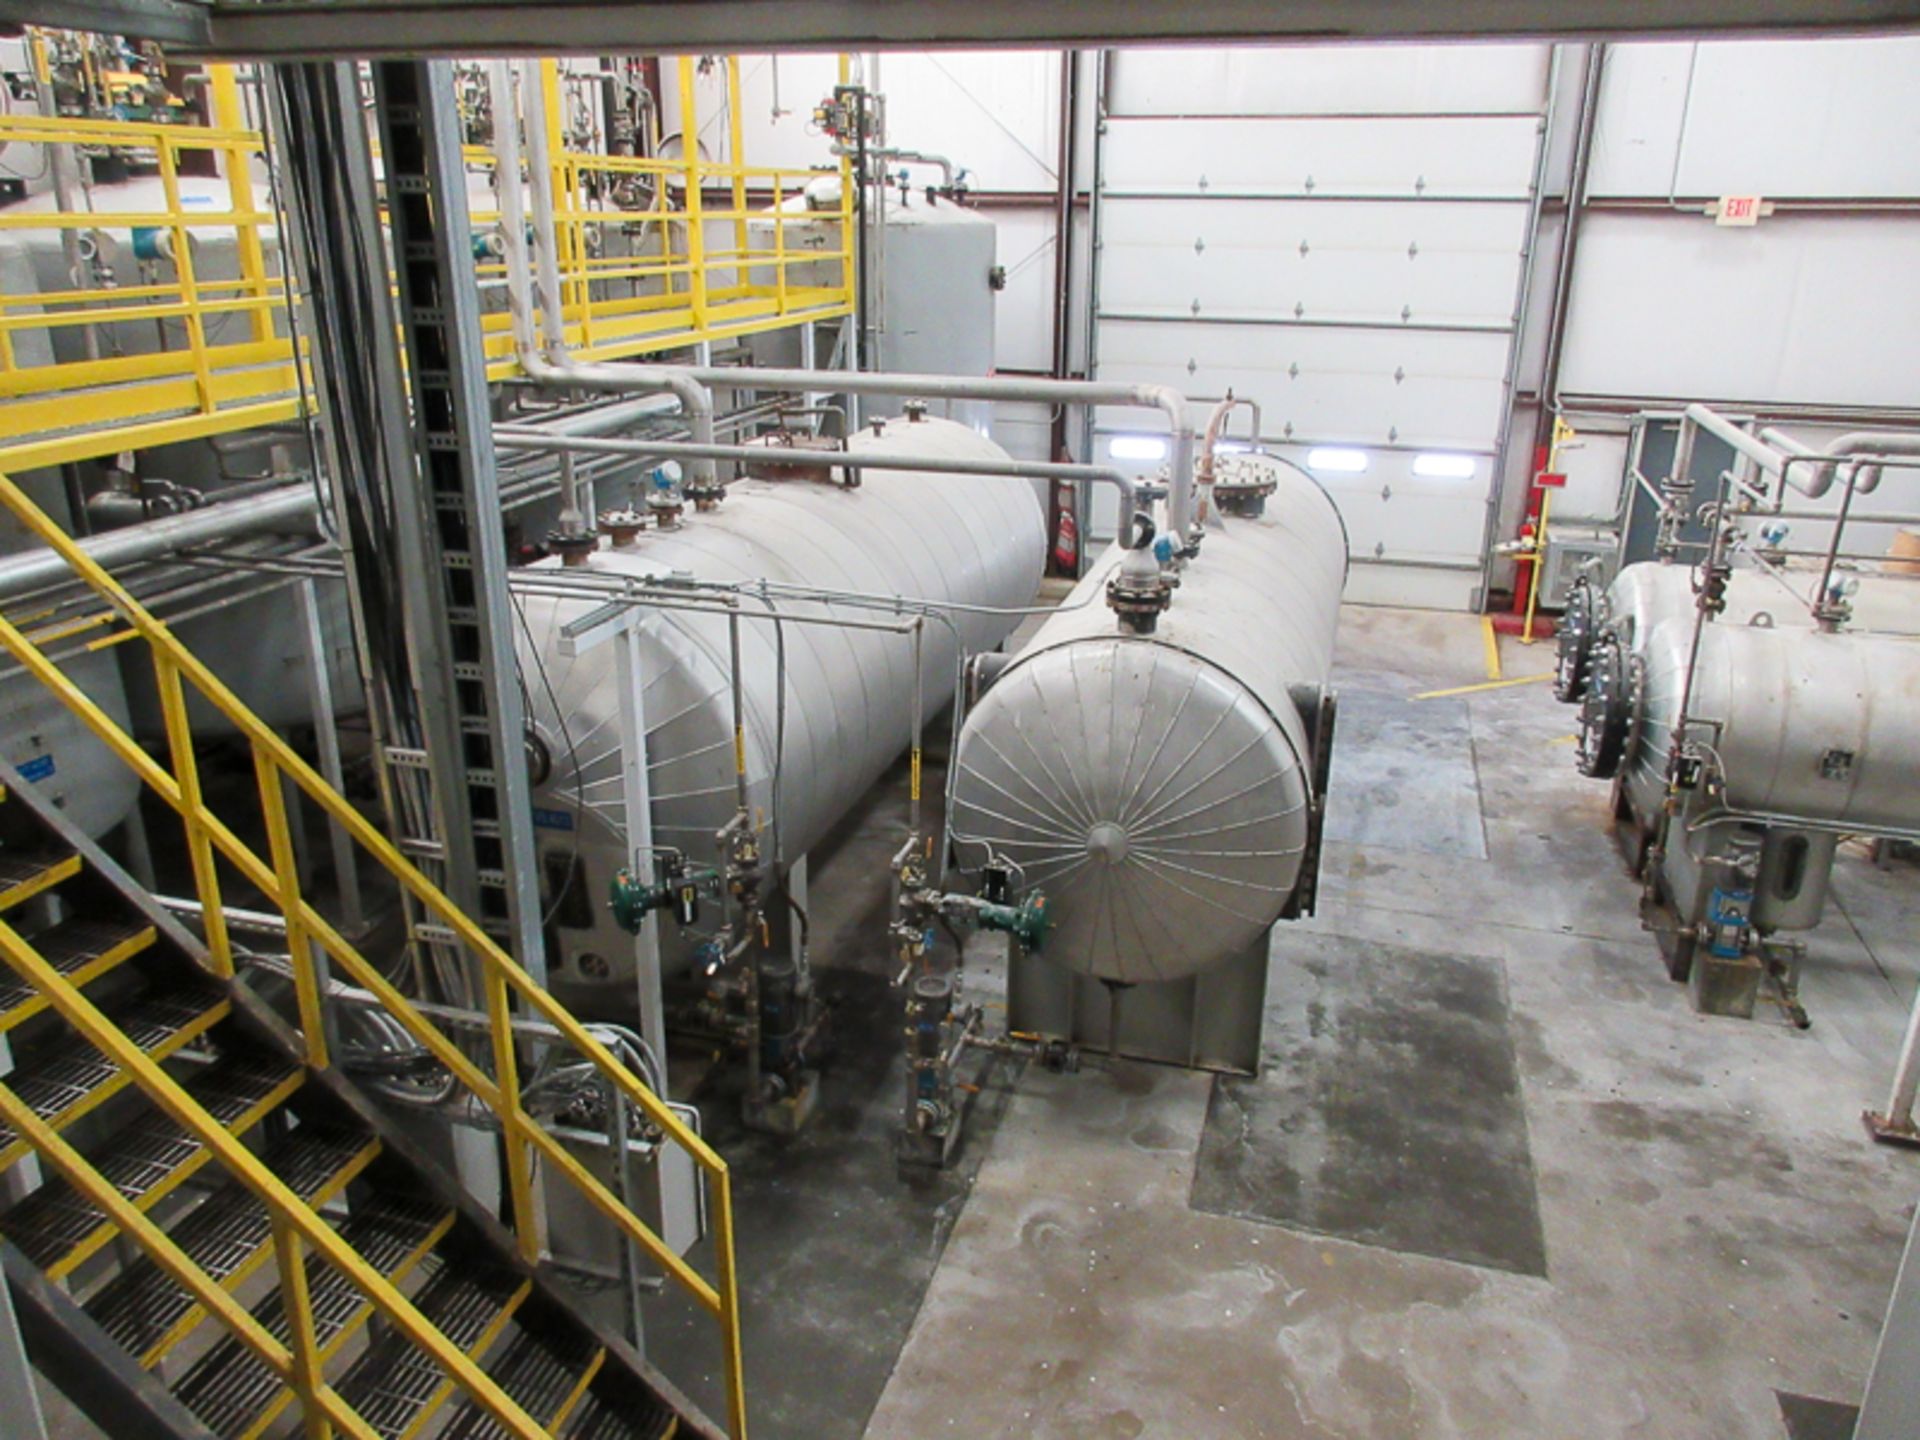 All Assets of a Former 10MGY Biodiesel Plant *********SOLD SUBJECT TO SELLER CONFIRMATION******* - Image 6 of 8